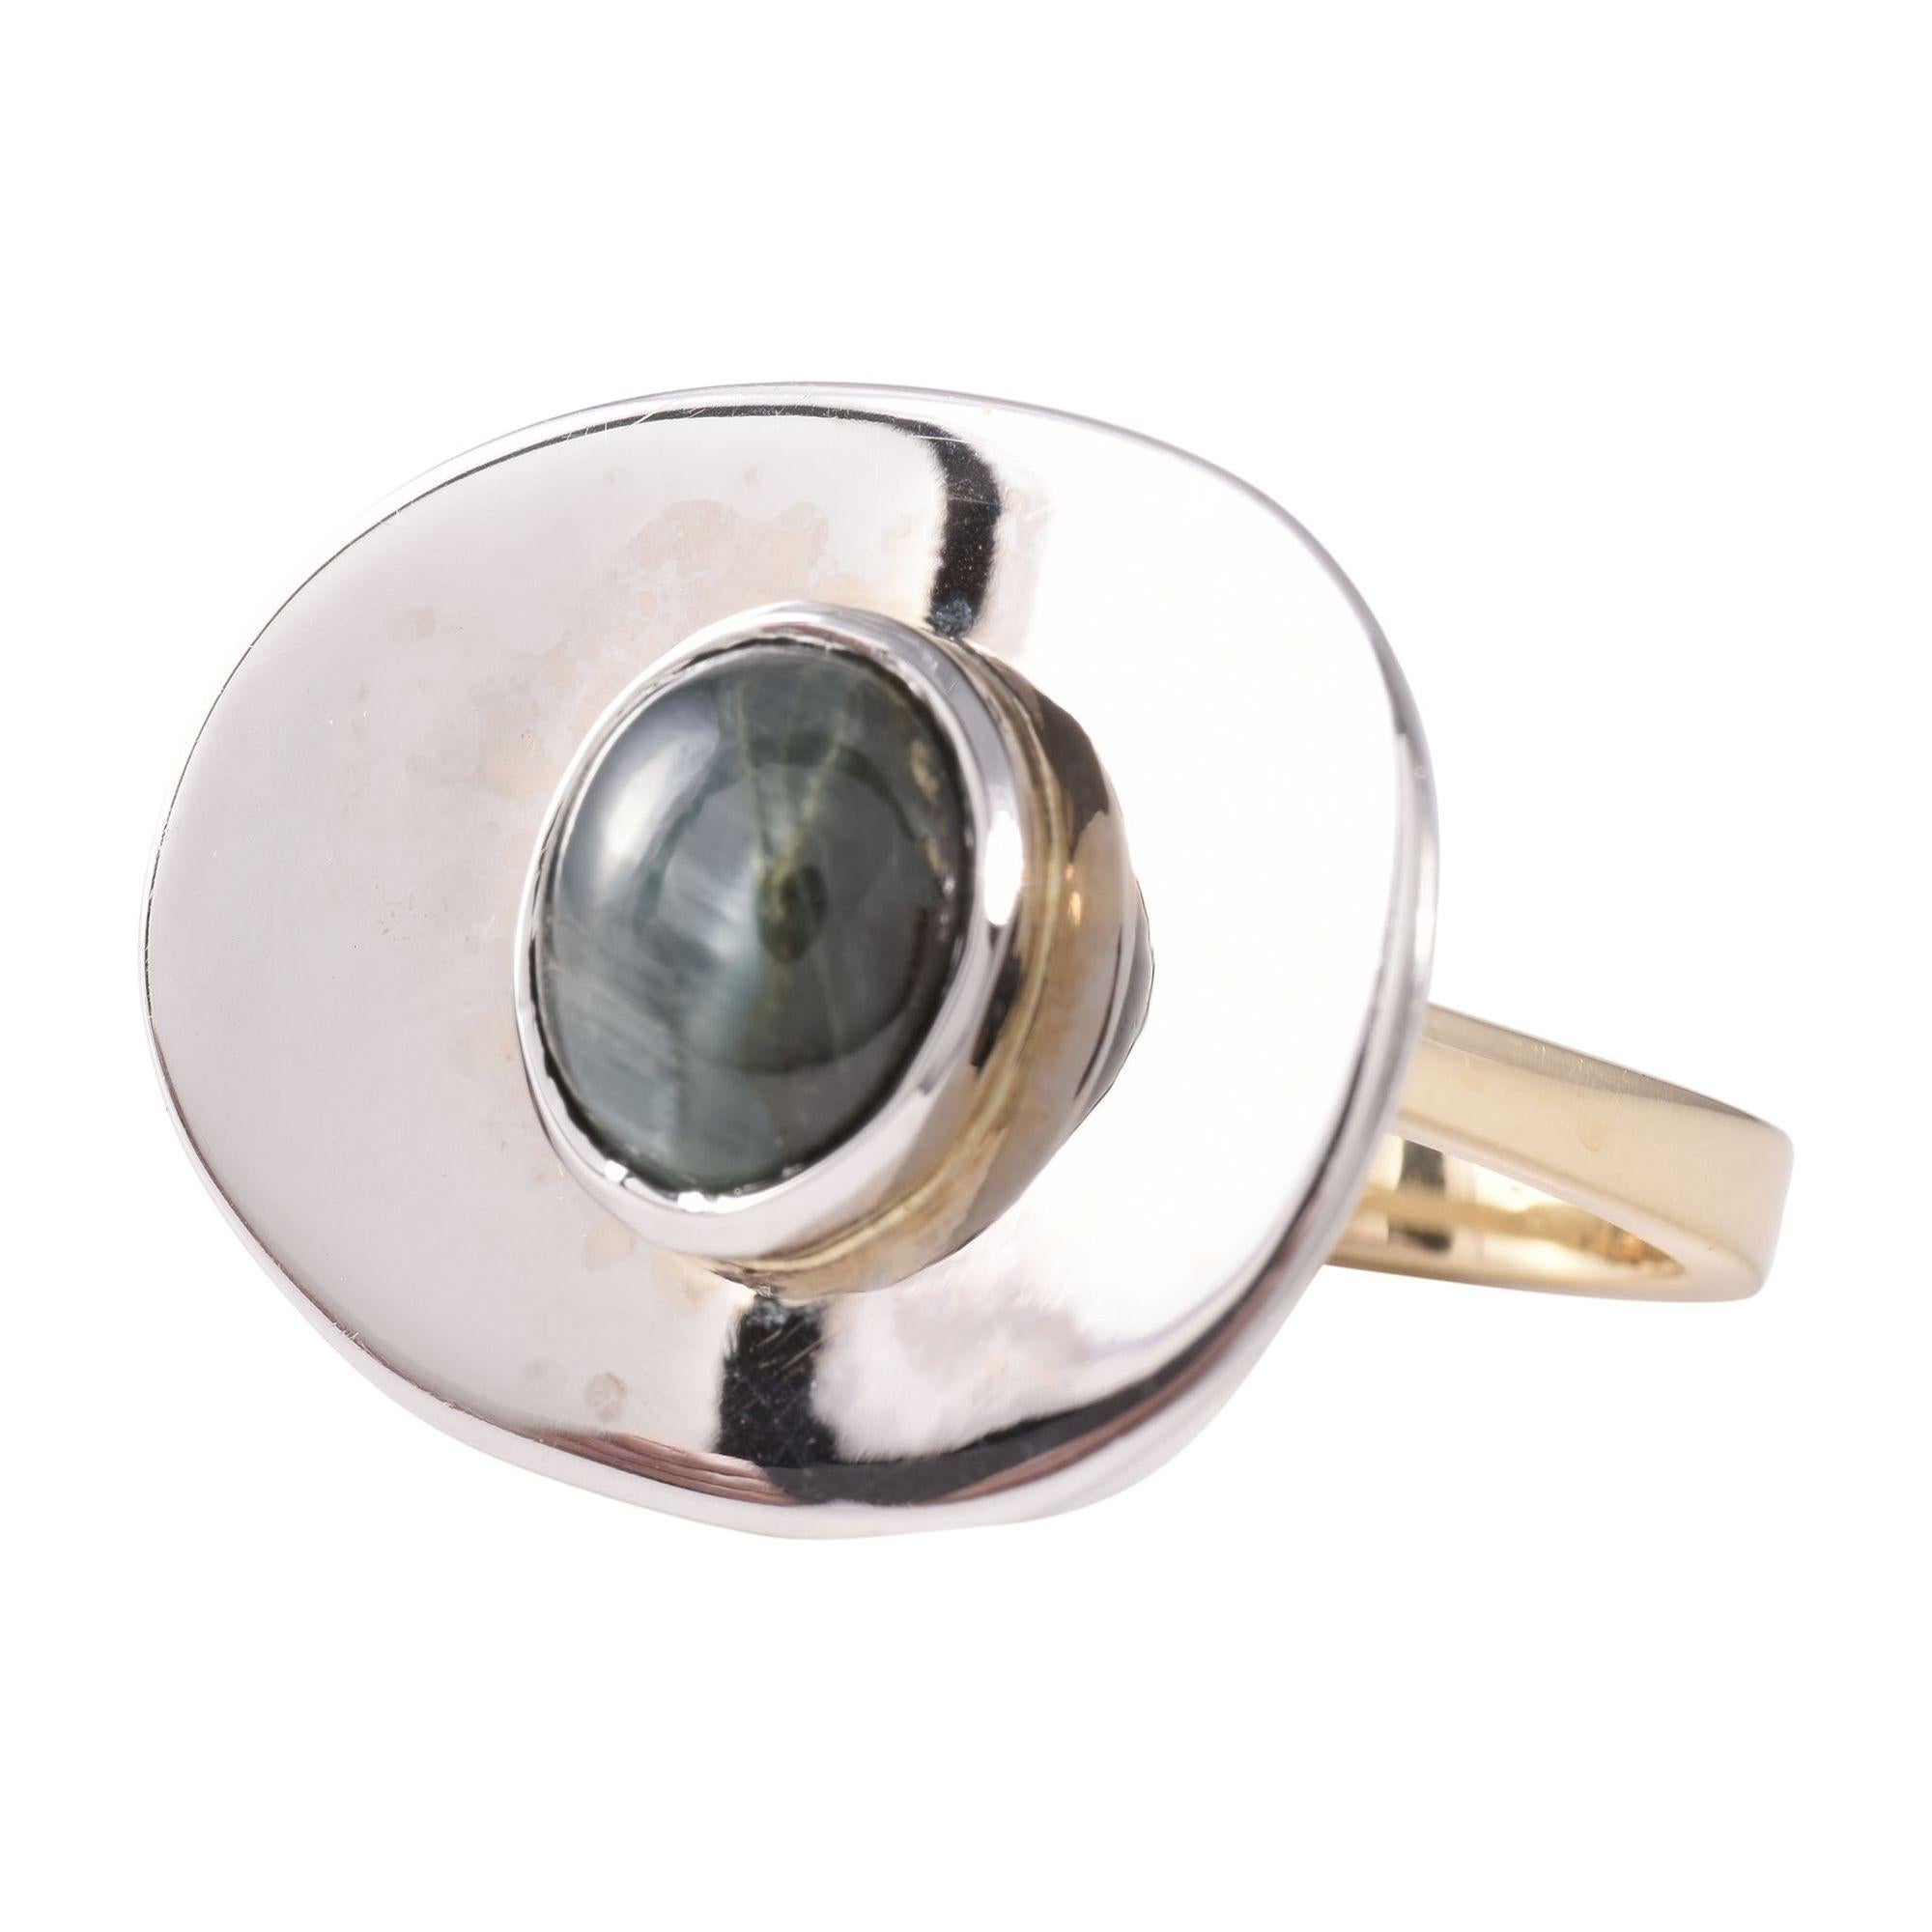 Estate green cats eye tourmaline two tone gold ring. This 14 karat white and yellow gold ring features a green cats eye tourmaline. The cats eye ring is a size 5.75. [KIMH 2139 P]

*Resizing available for additional charge.